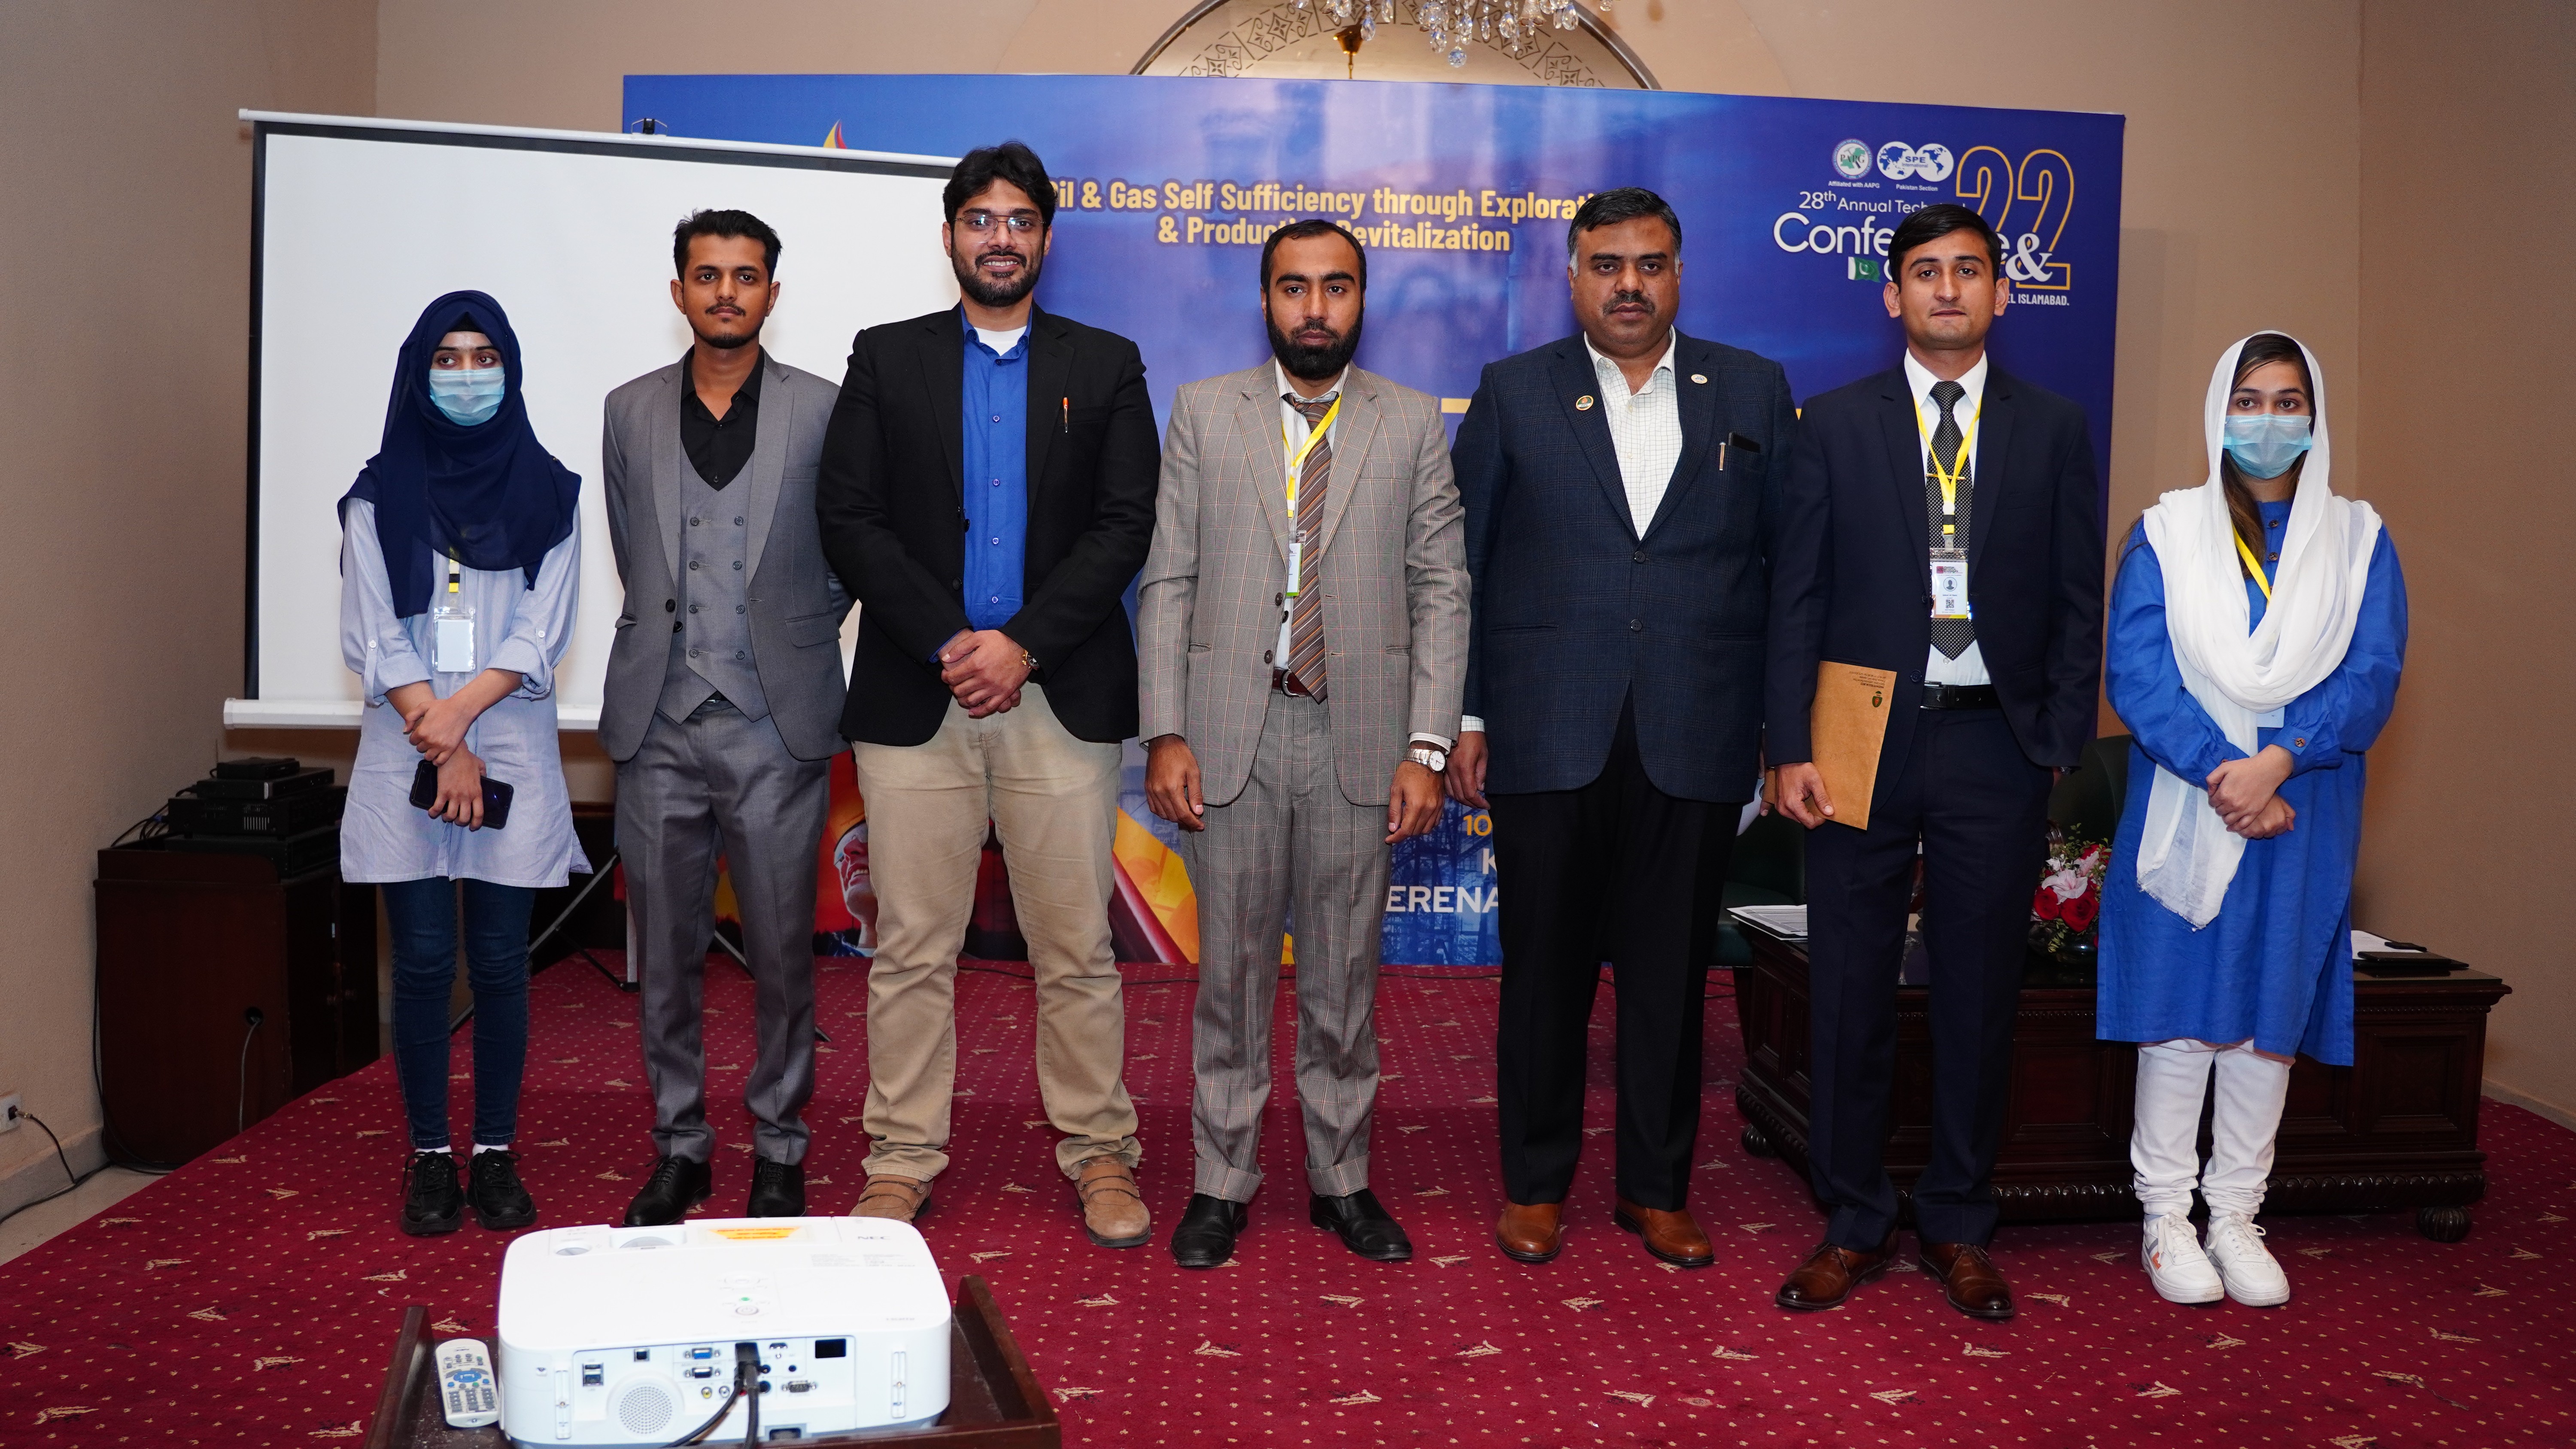 The group photo of the students and the presenters with chief guests at oil conference show